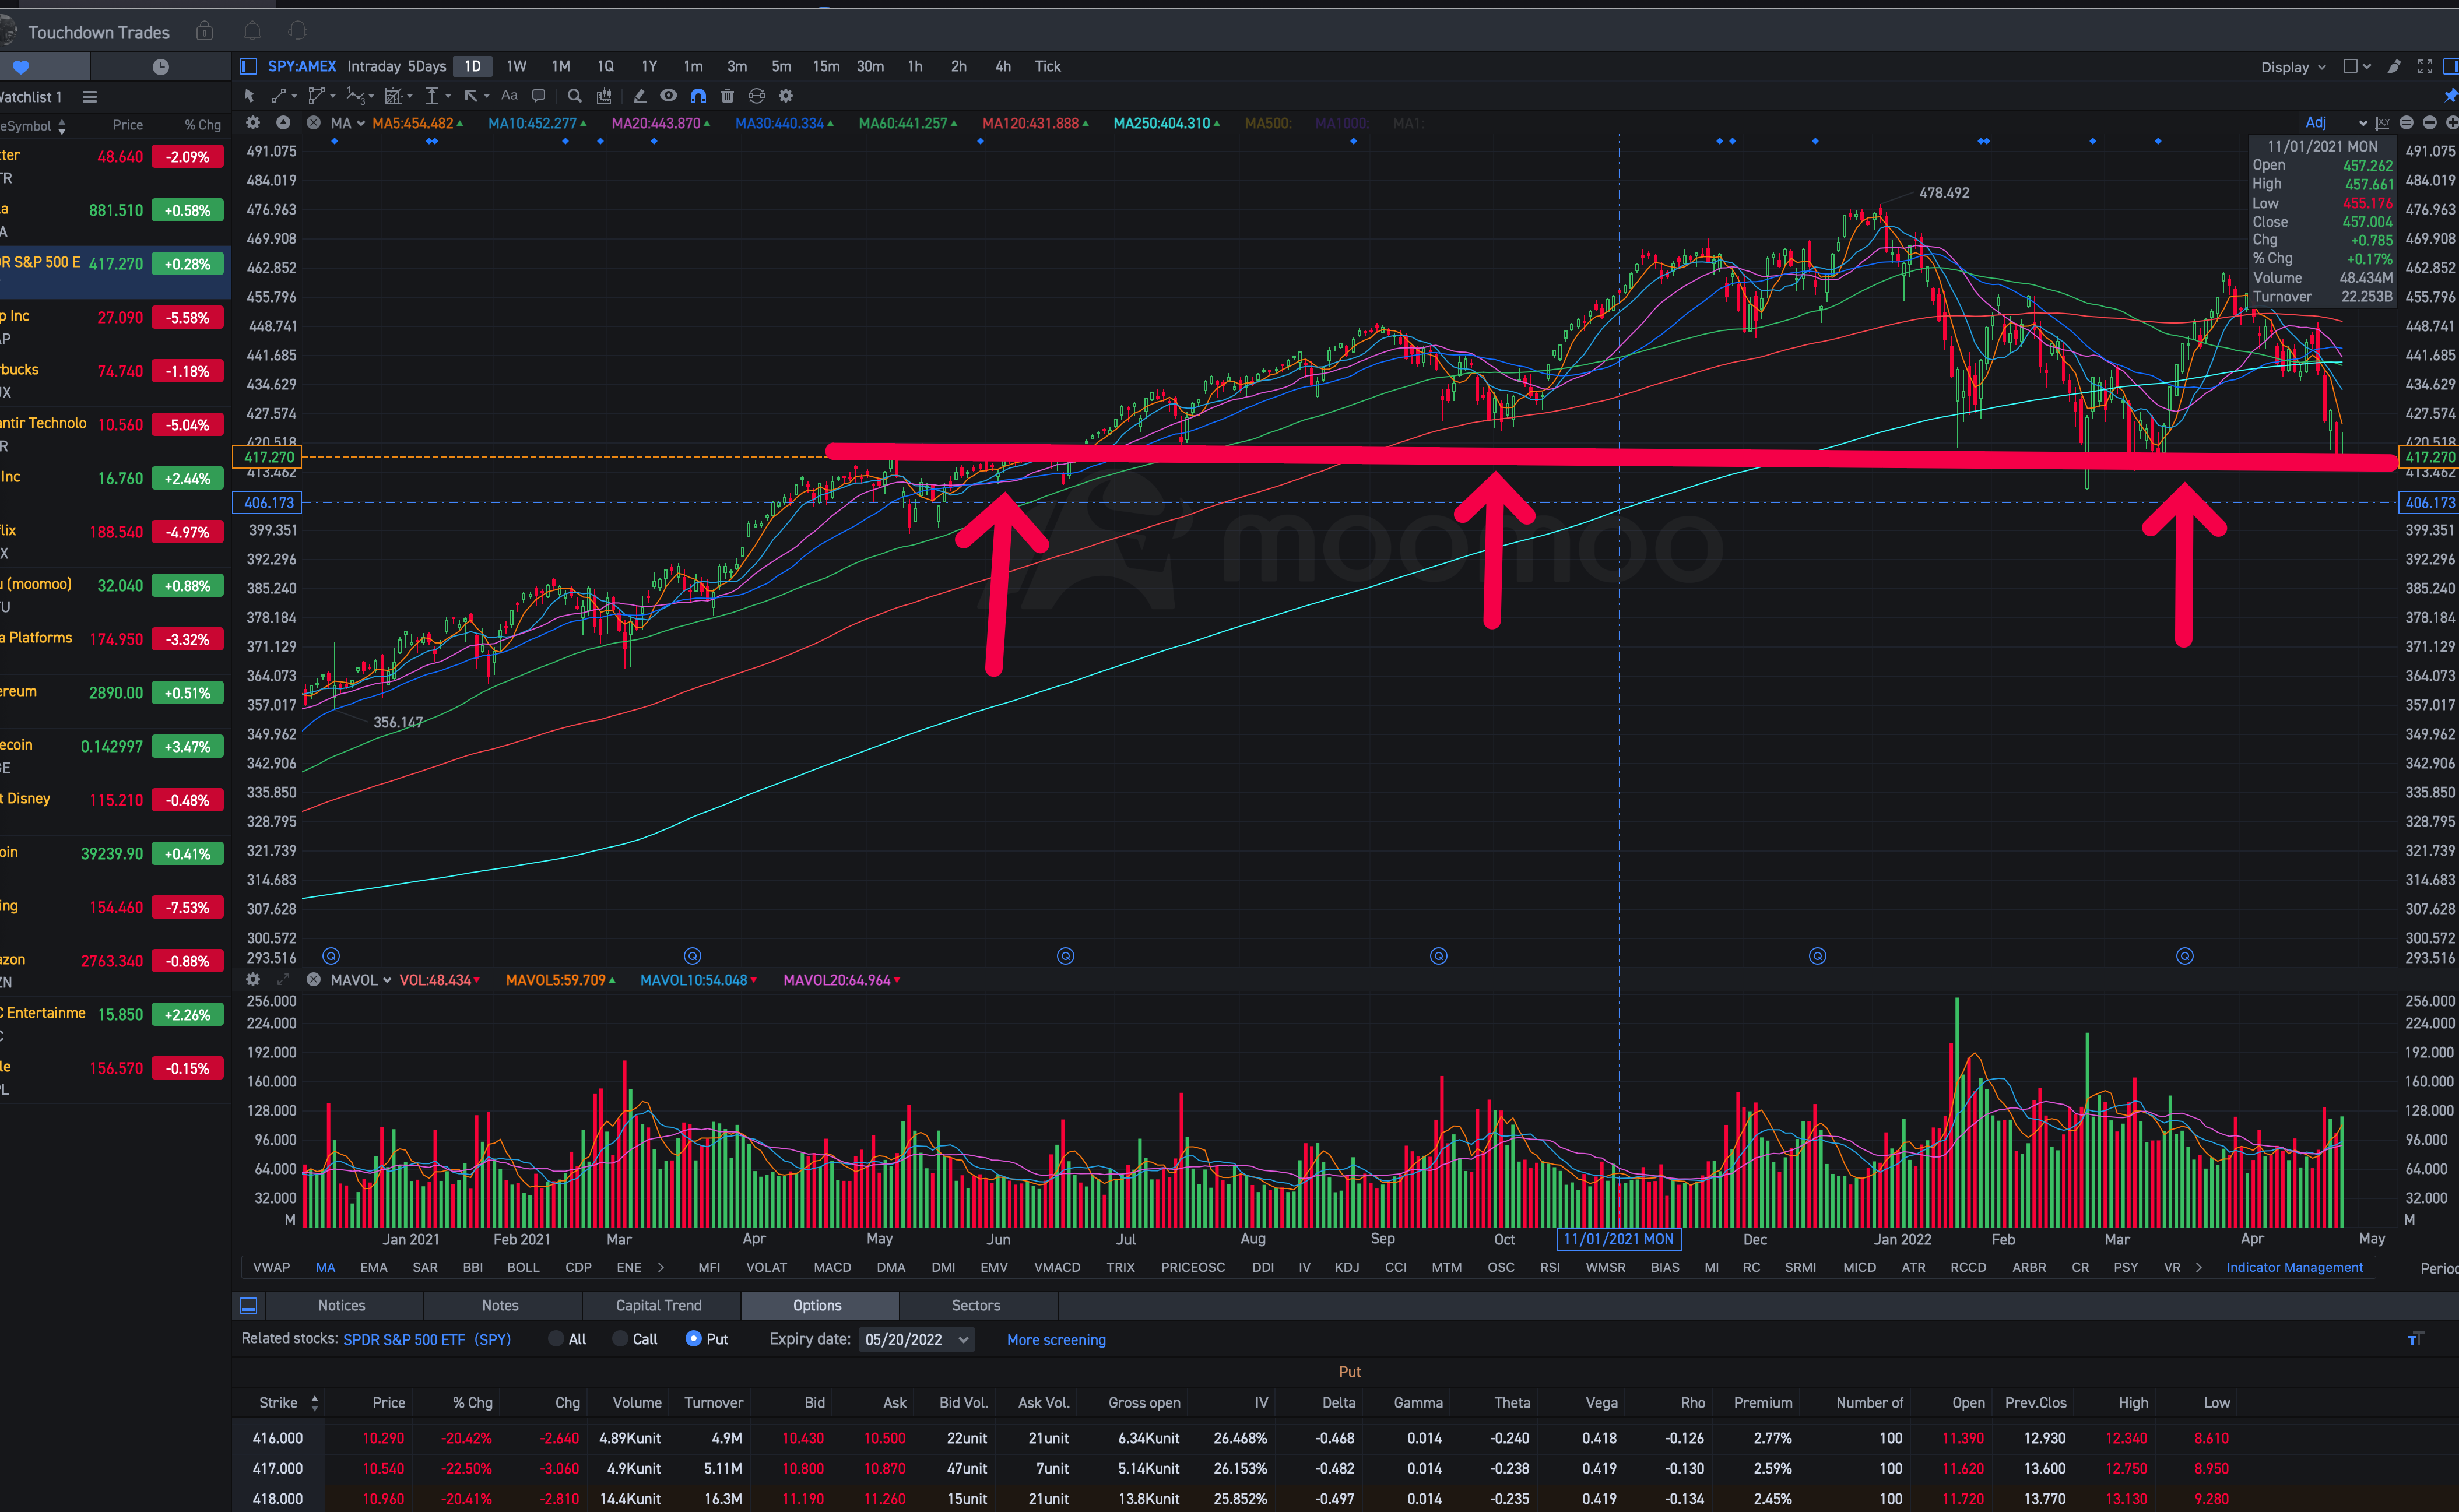 SPY coming into major support?